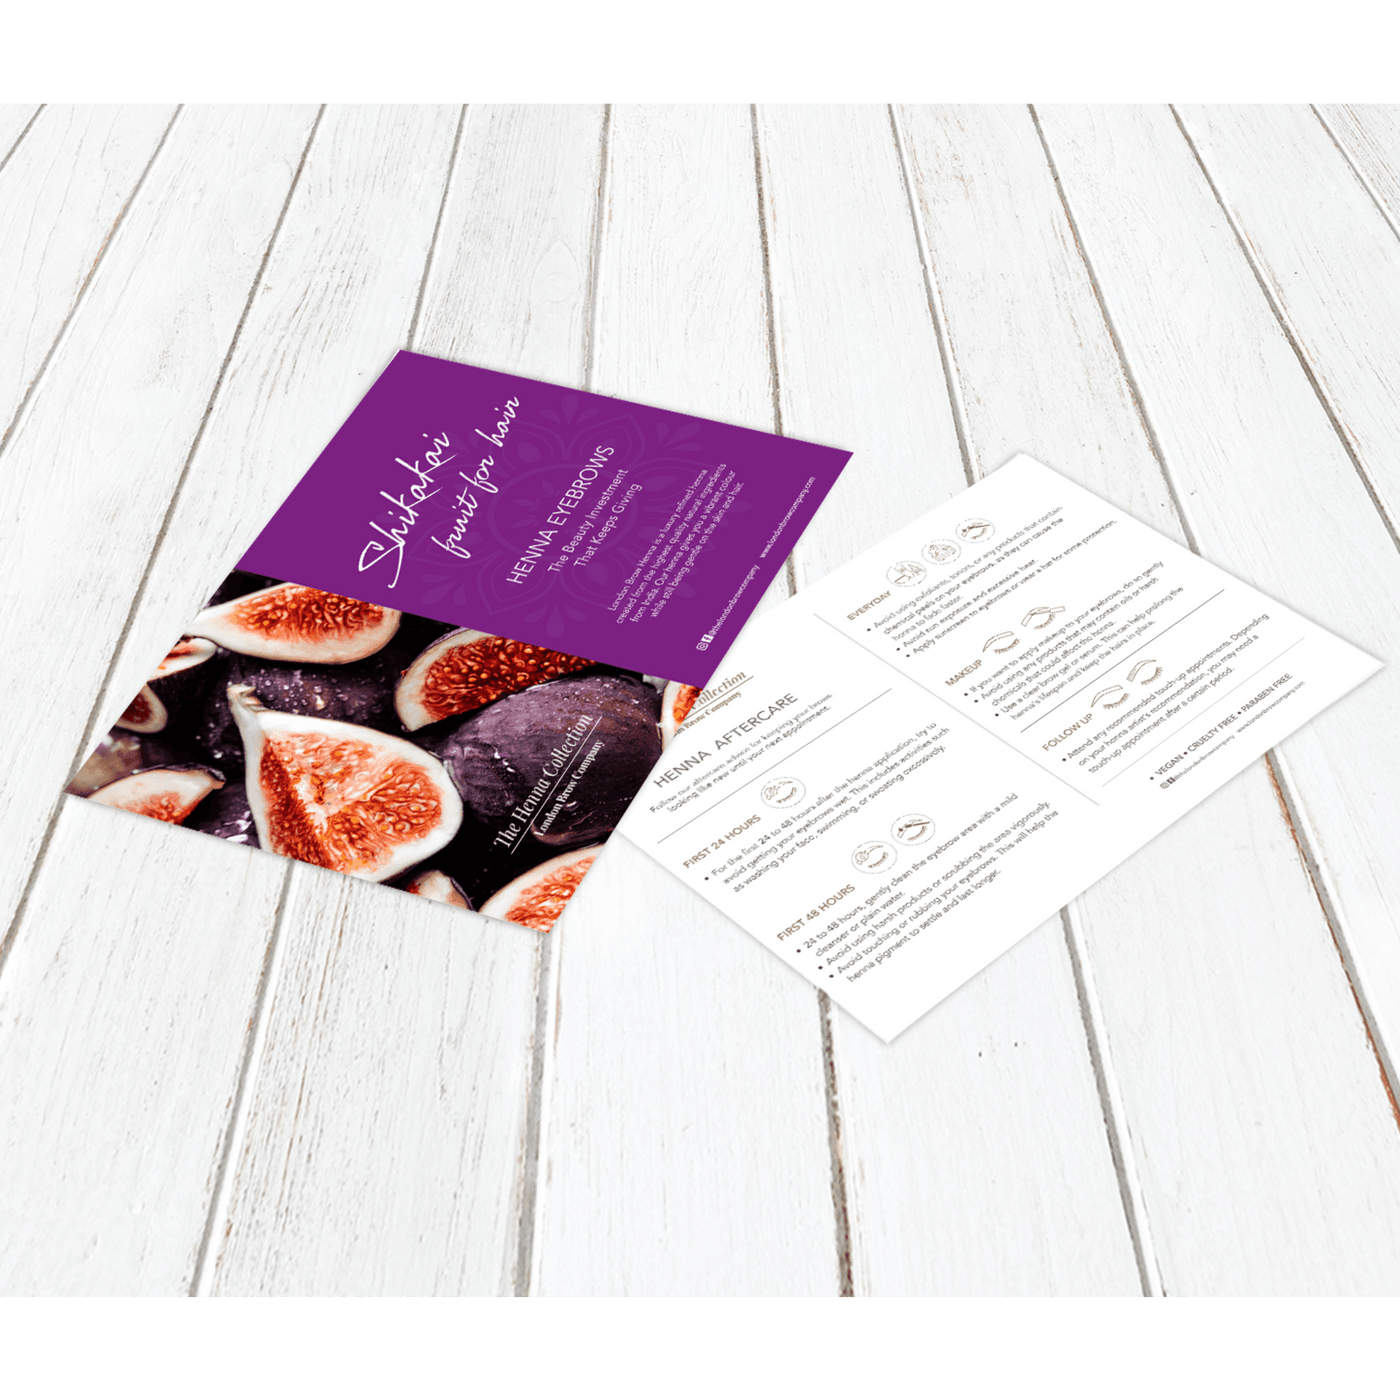 Brow Henna Information and Aftercare Cards - The London Brow Company